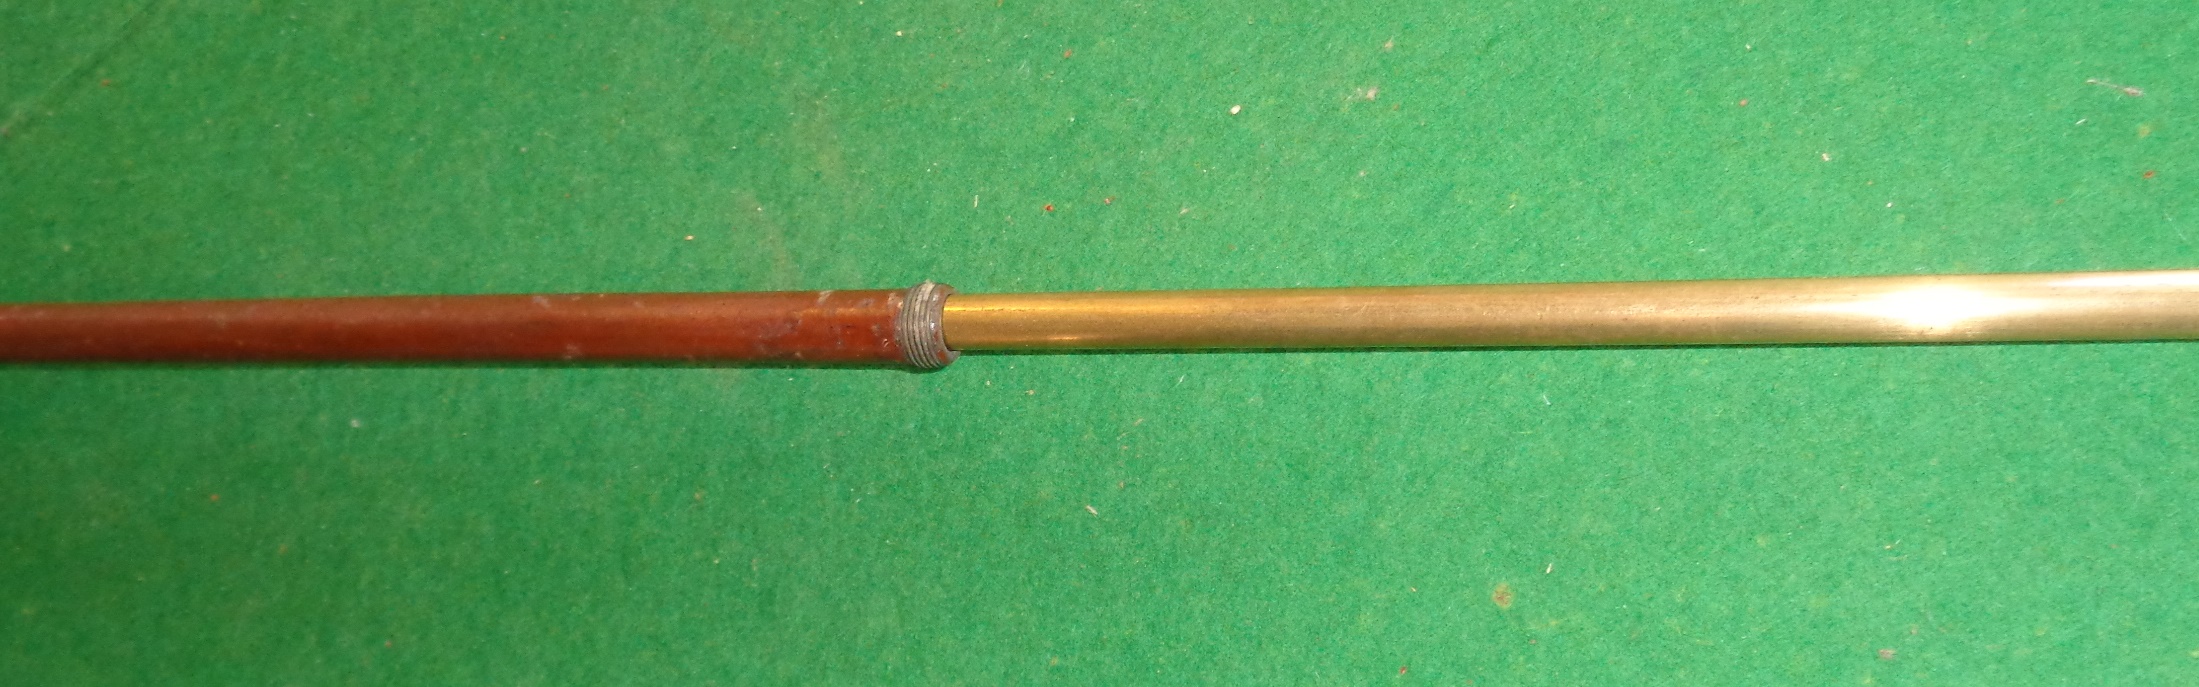 Victorian gentleman's 'poaching' walking cane/swagger stick converting to a 7ft 5" fly fishing - Image 4 of 5